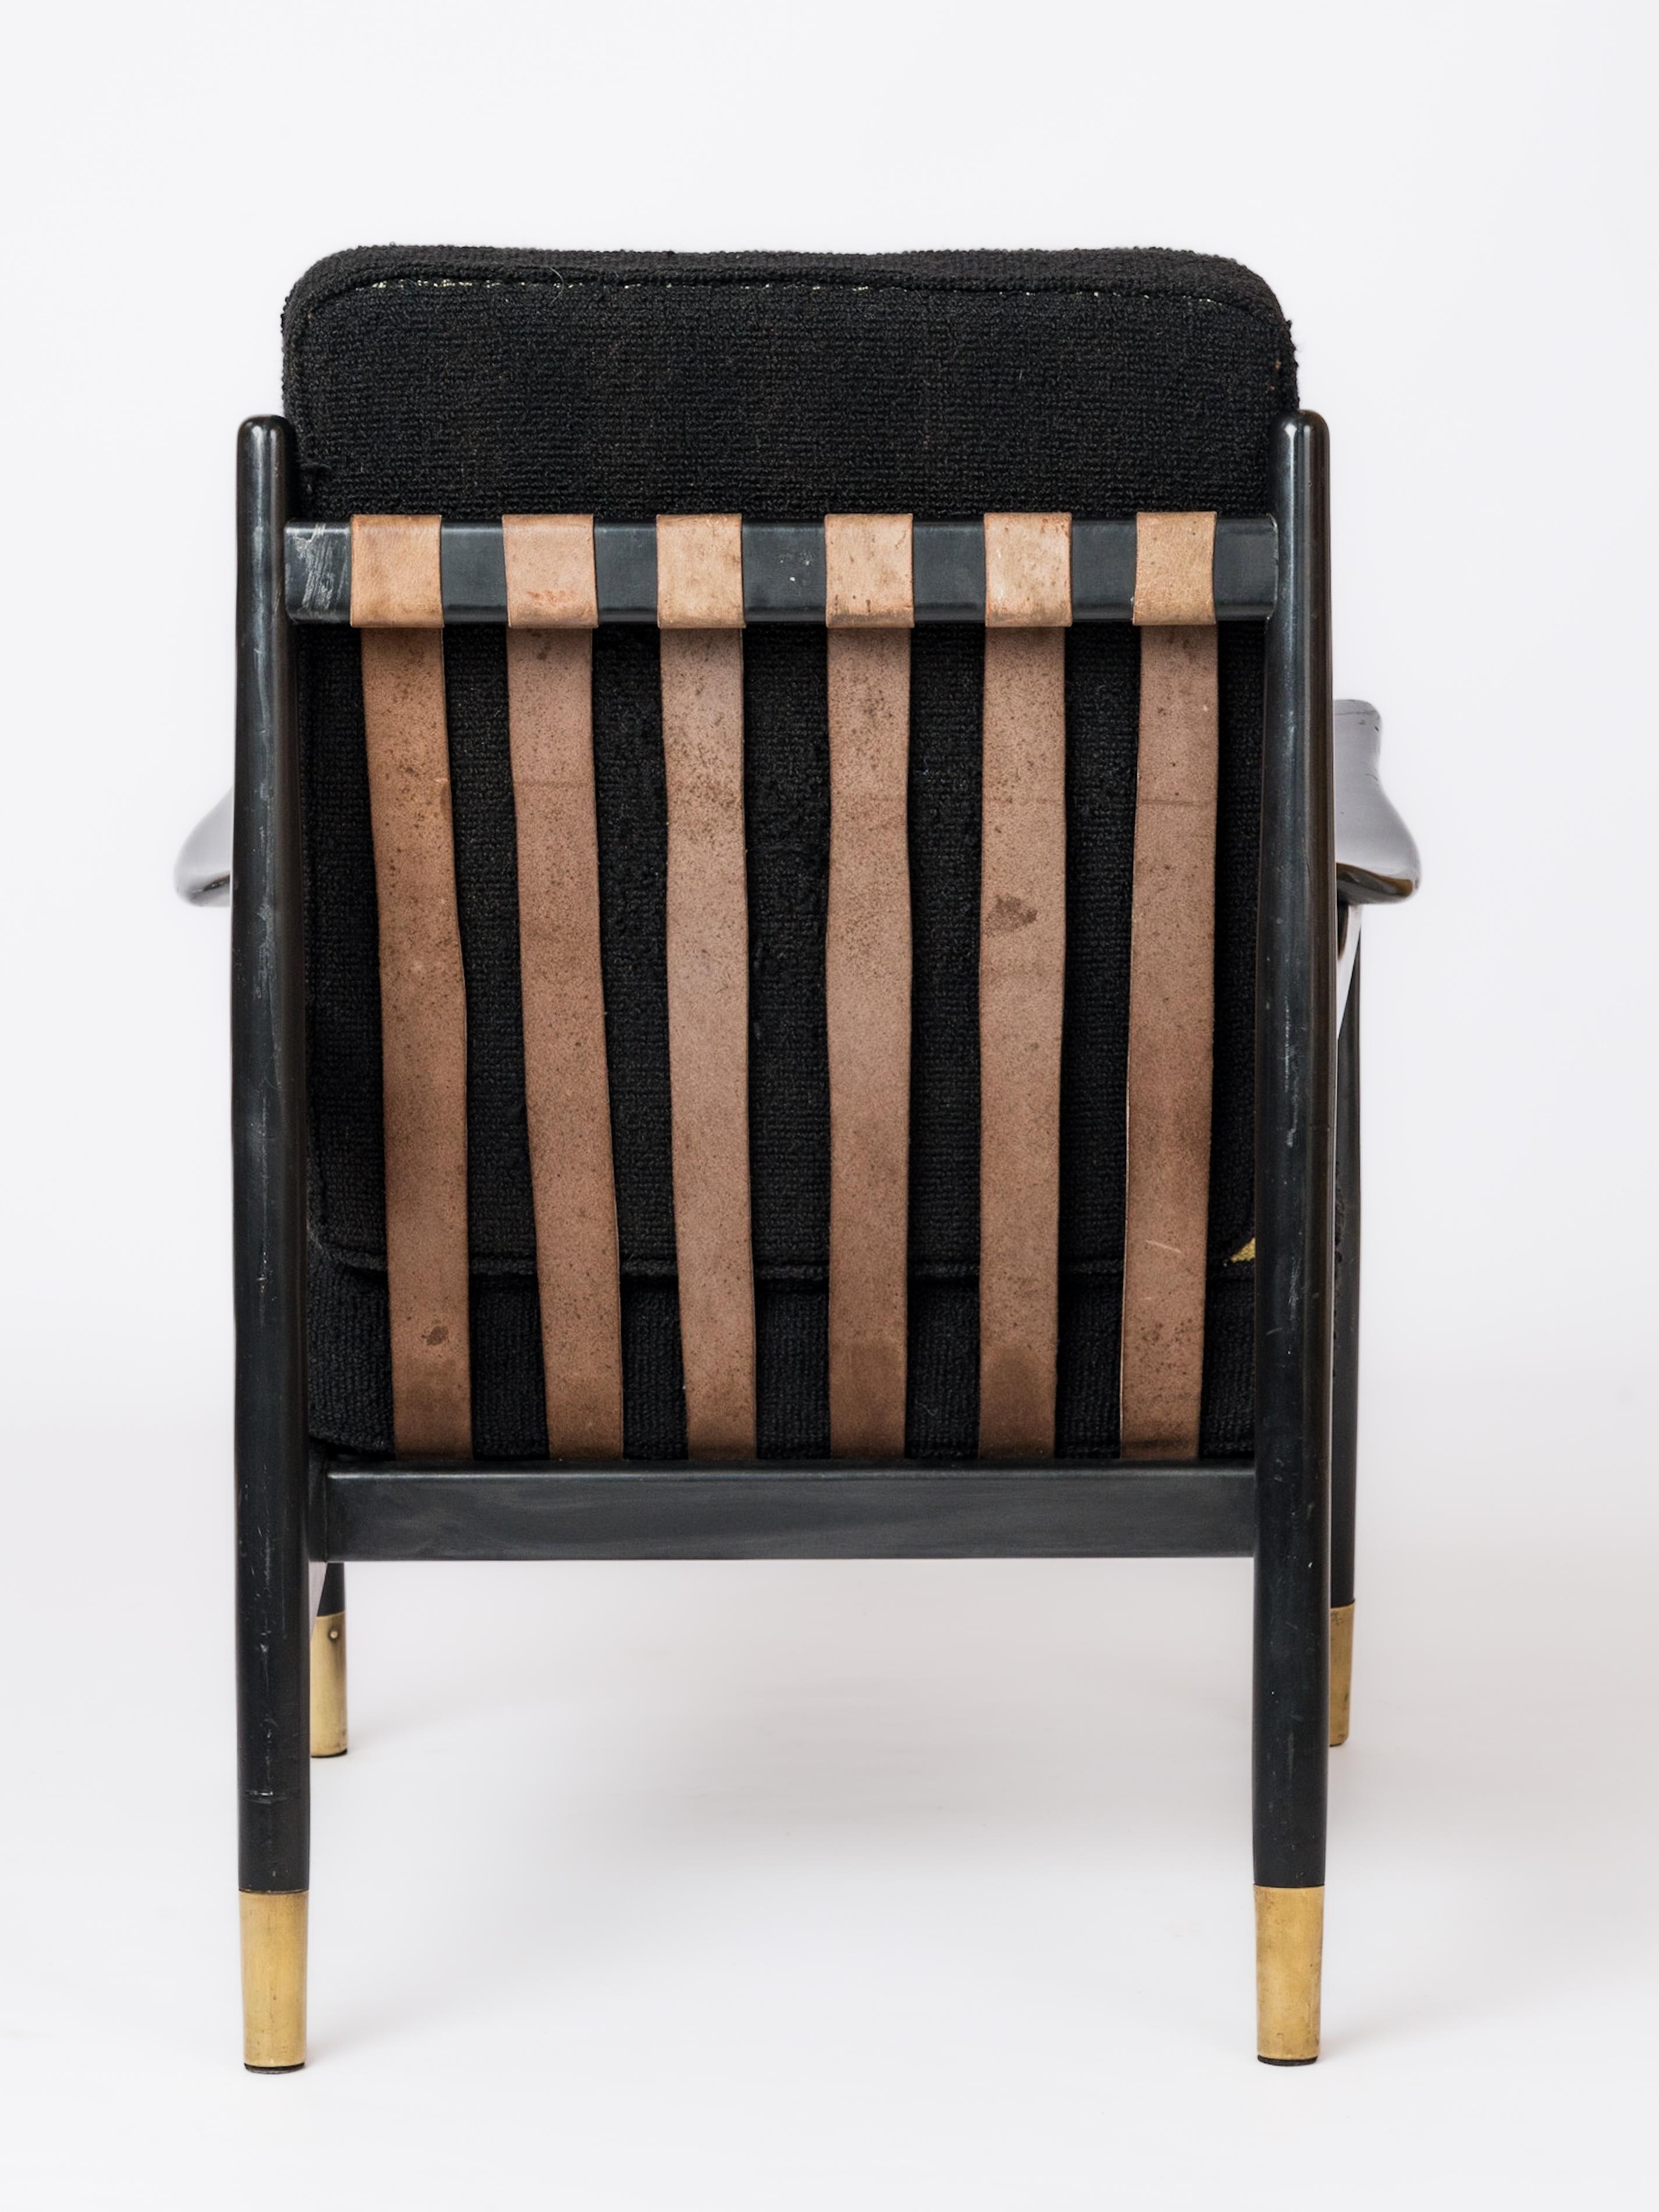 Italian Mid Century Black Lacquered Wood Armchair in style of Gio Ponti - Italy 1960's For Sale